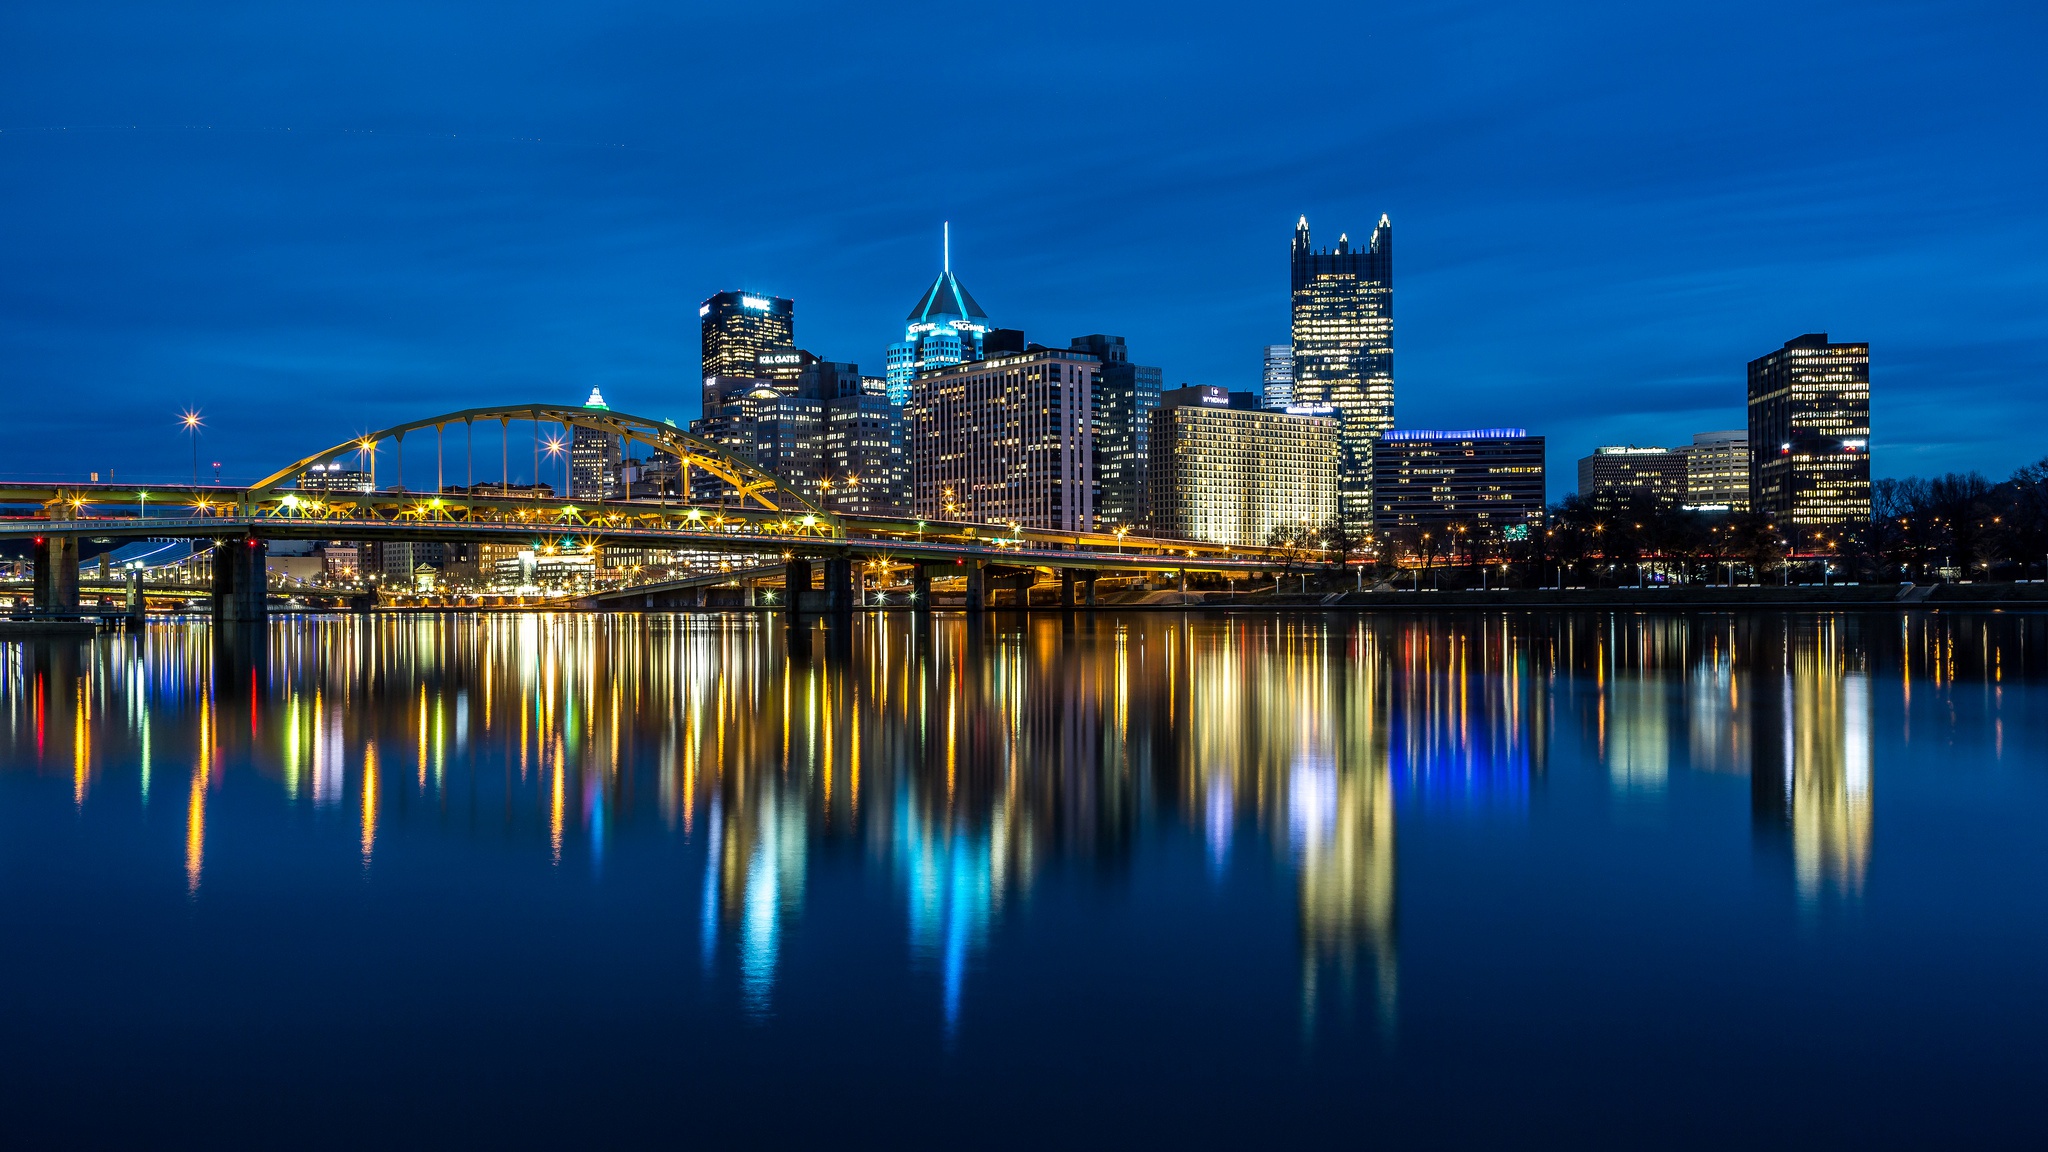 man made, pittsburgh, building, city, night, reflection, skyscraper, usa, cities